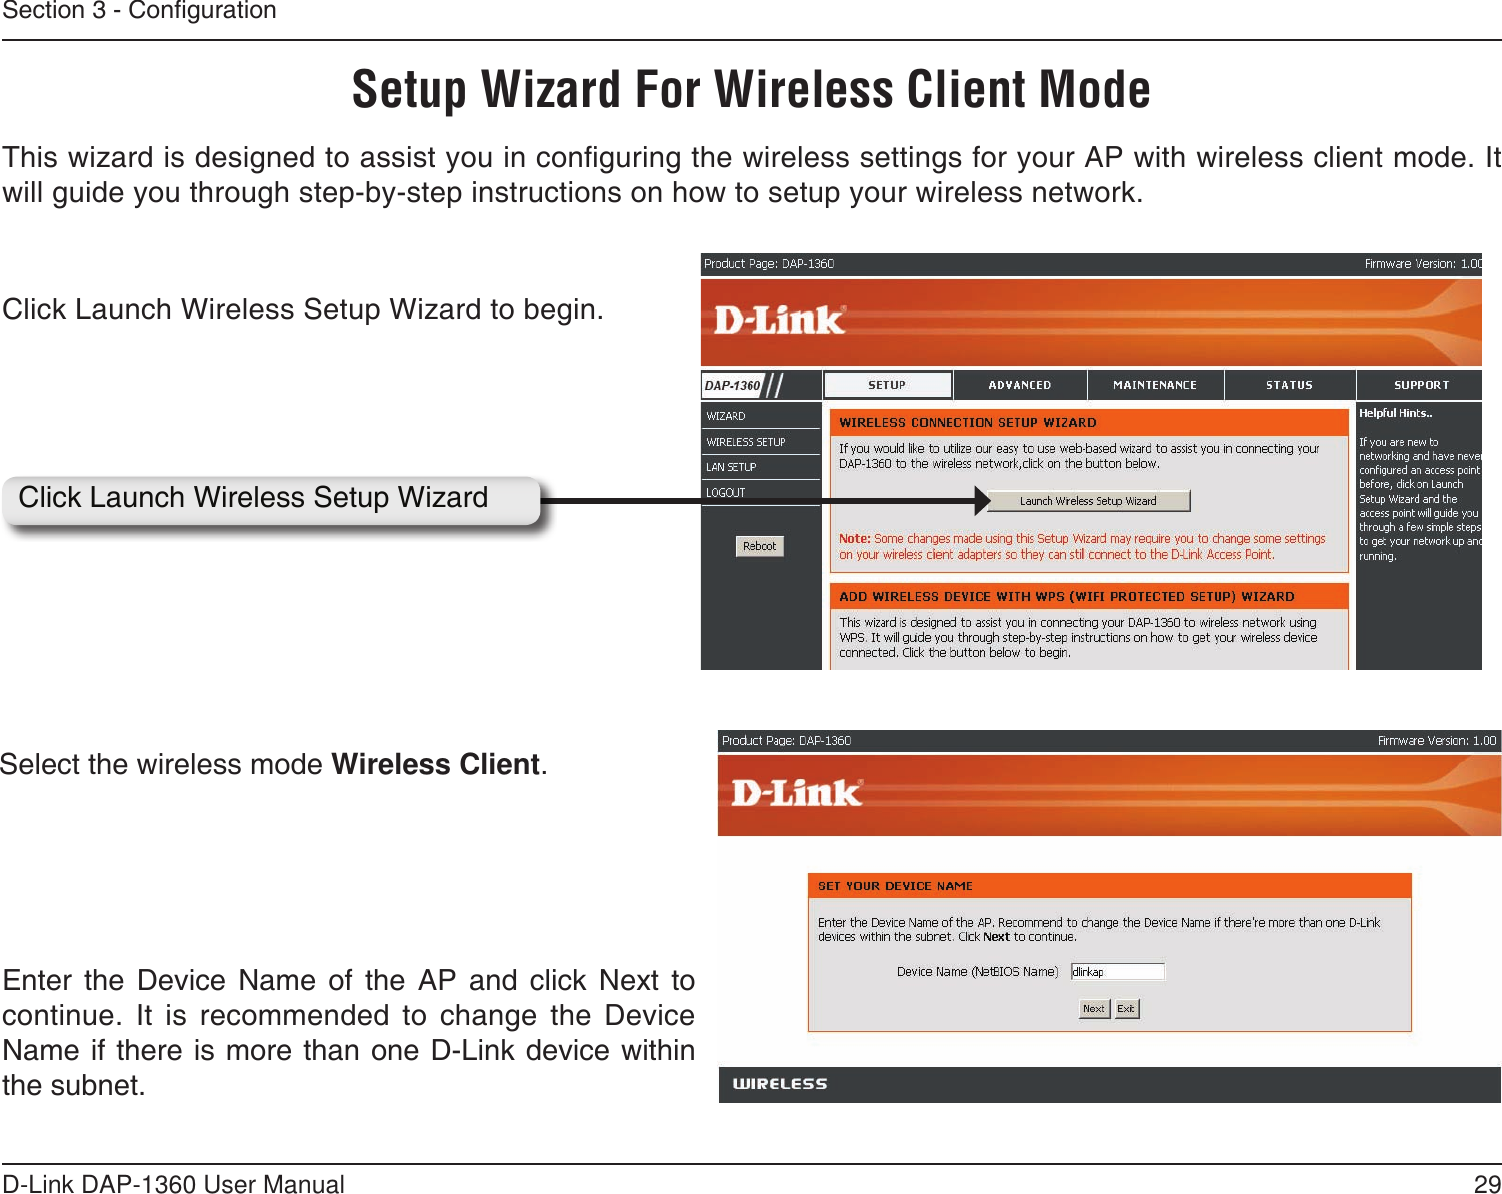 29D-Link DAP-1360 User ManualSection 3 - CongurationThis wizard is designed to assist you in conguring the wireless settings for your AP with wireless client mode. It will guide you through step-by-step instructions on how to setup your wireless network. Click Launch Wireless Setup Wizard to begin.Click Launch Wireless Setup WizardSetup Wizard For Wireless Client ModeEnter  the  Device  Name  of  the  AP  and  click  Next  to continue.  It  is  recommended  to  change  the  Device Name if there is more than one D-Link device within the subnet.Select the wireless mode Wireless Client.